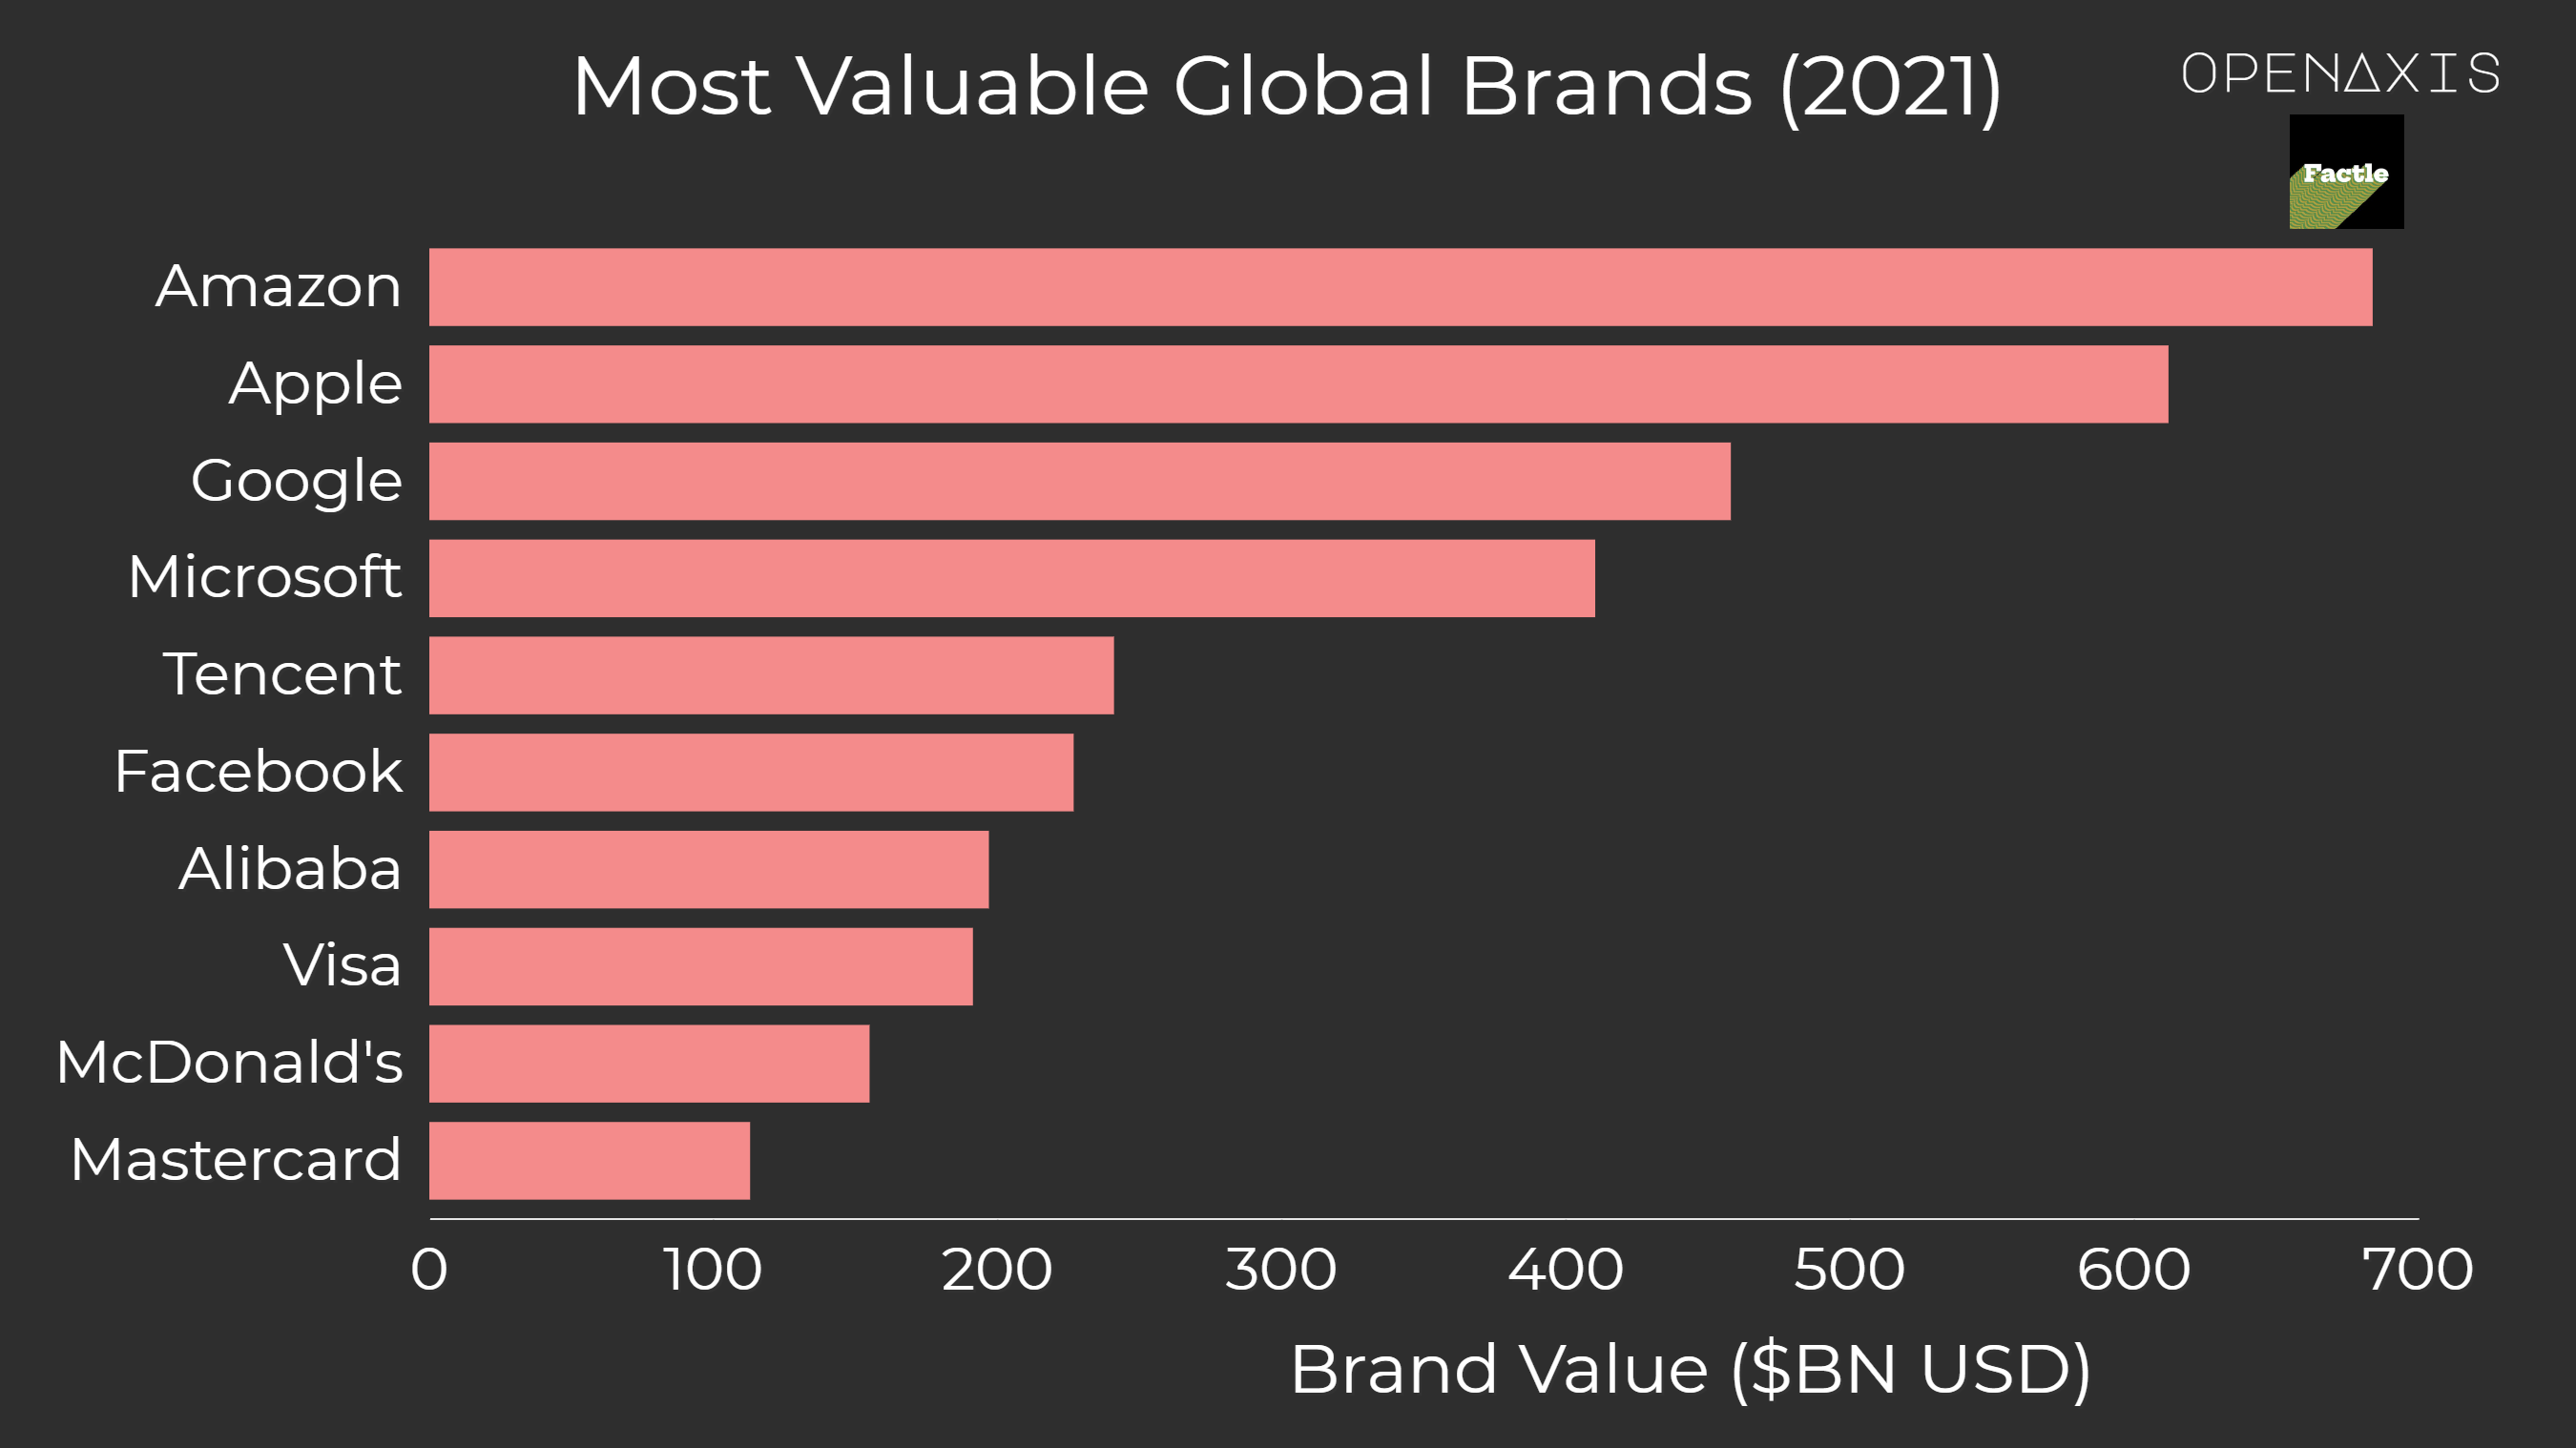 "Most Valuable Global Brands (2021)"